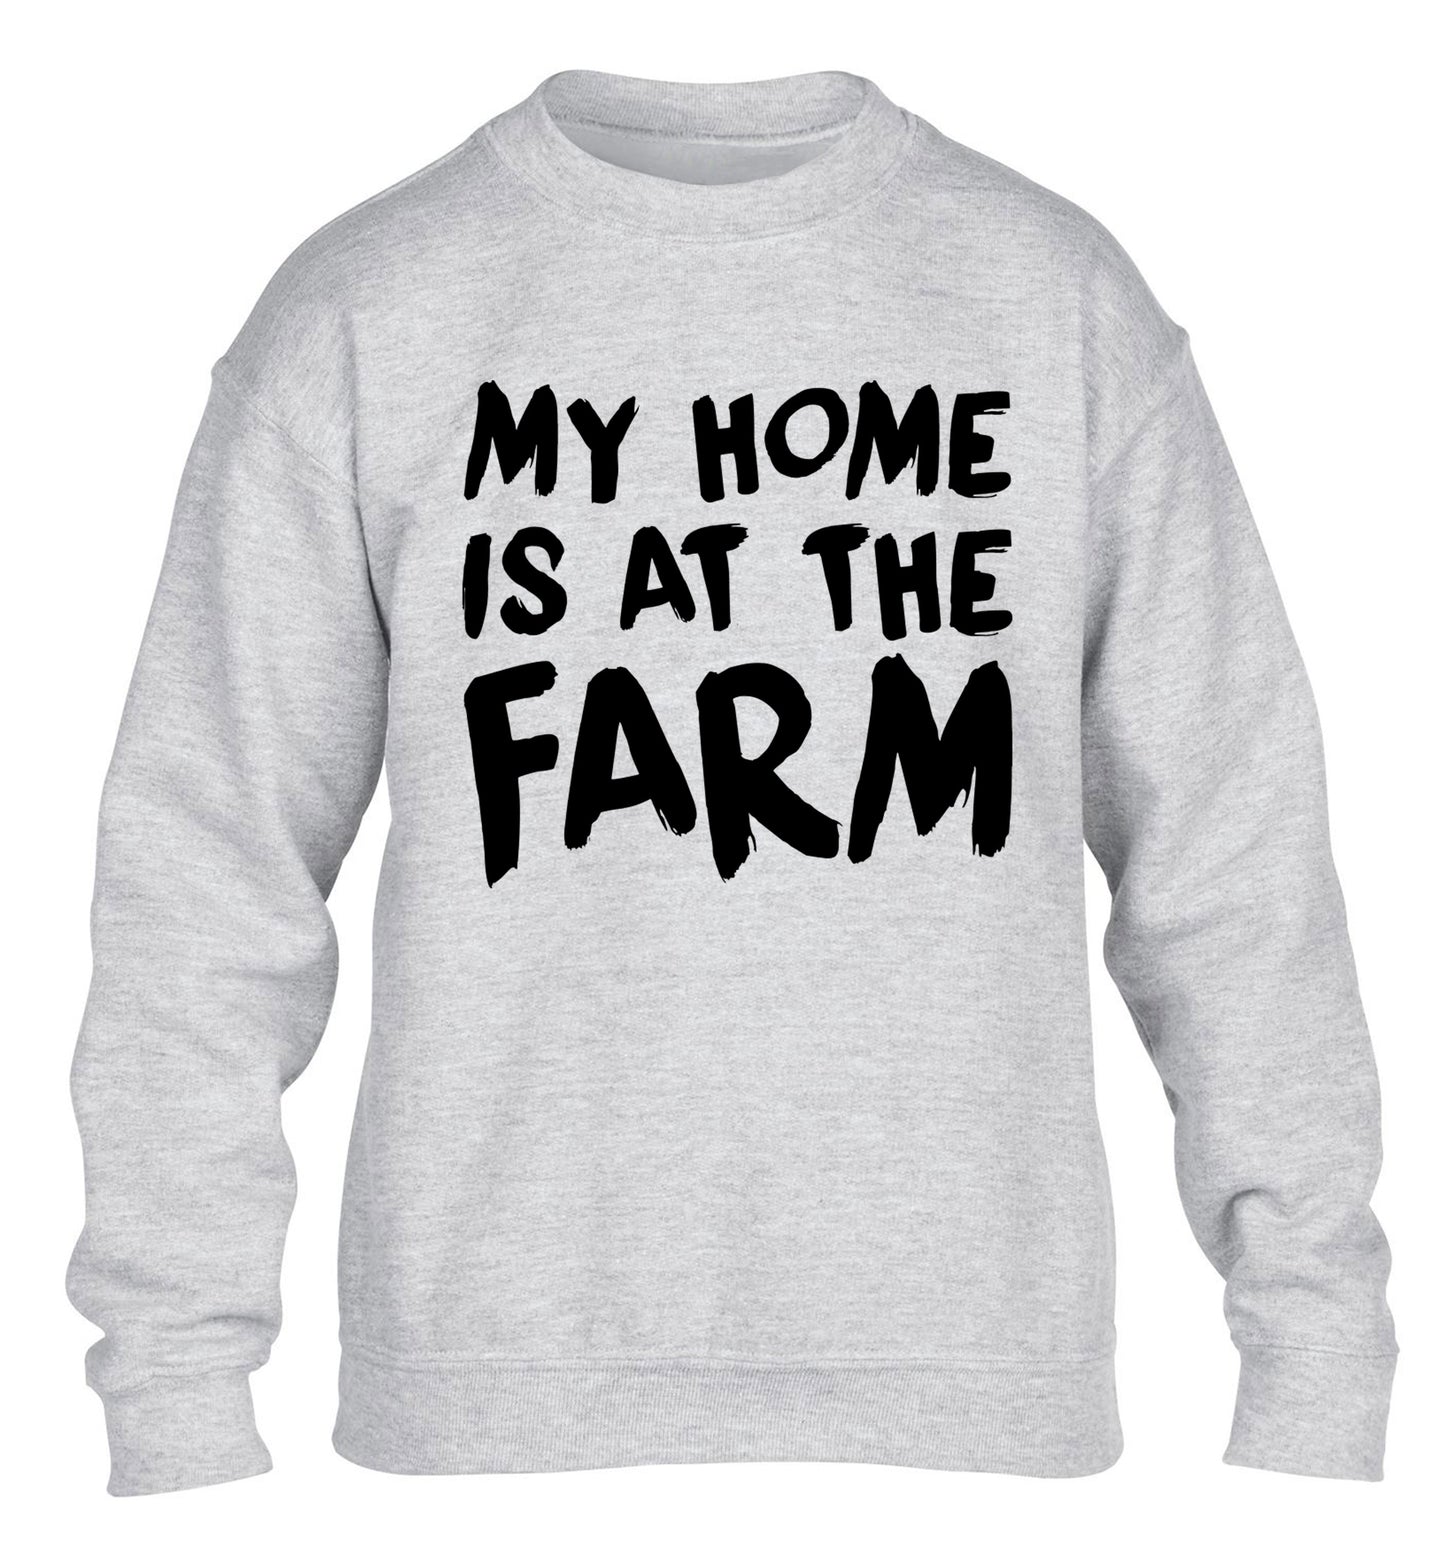 My home is at the farm children's grey sweater 12-14 Years